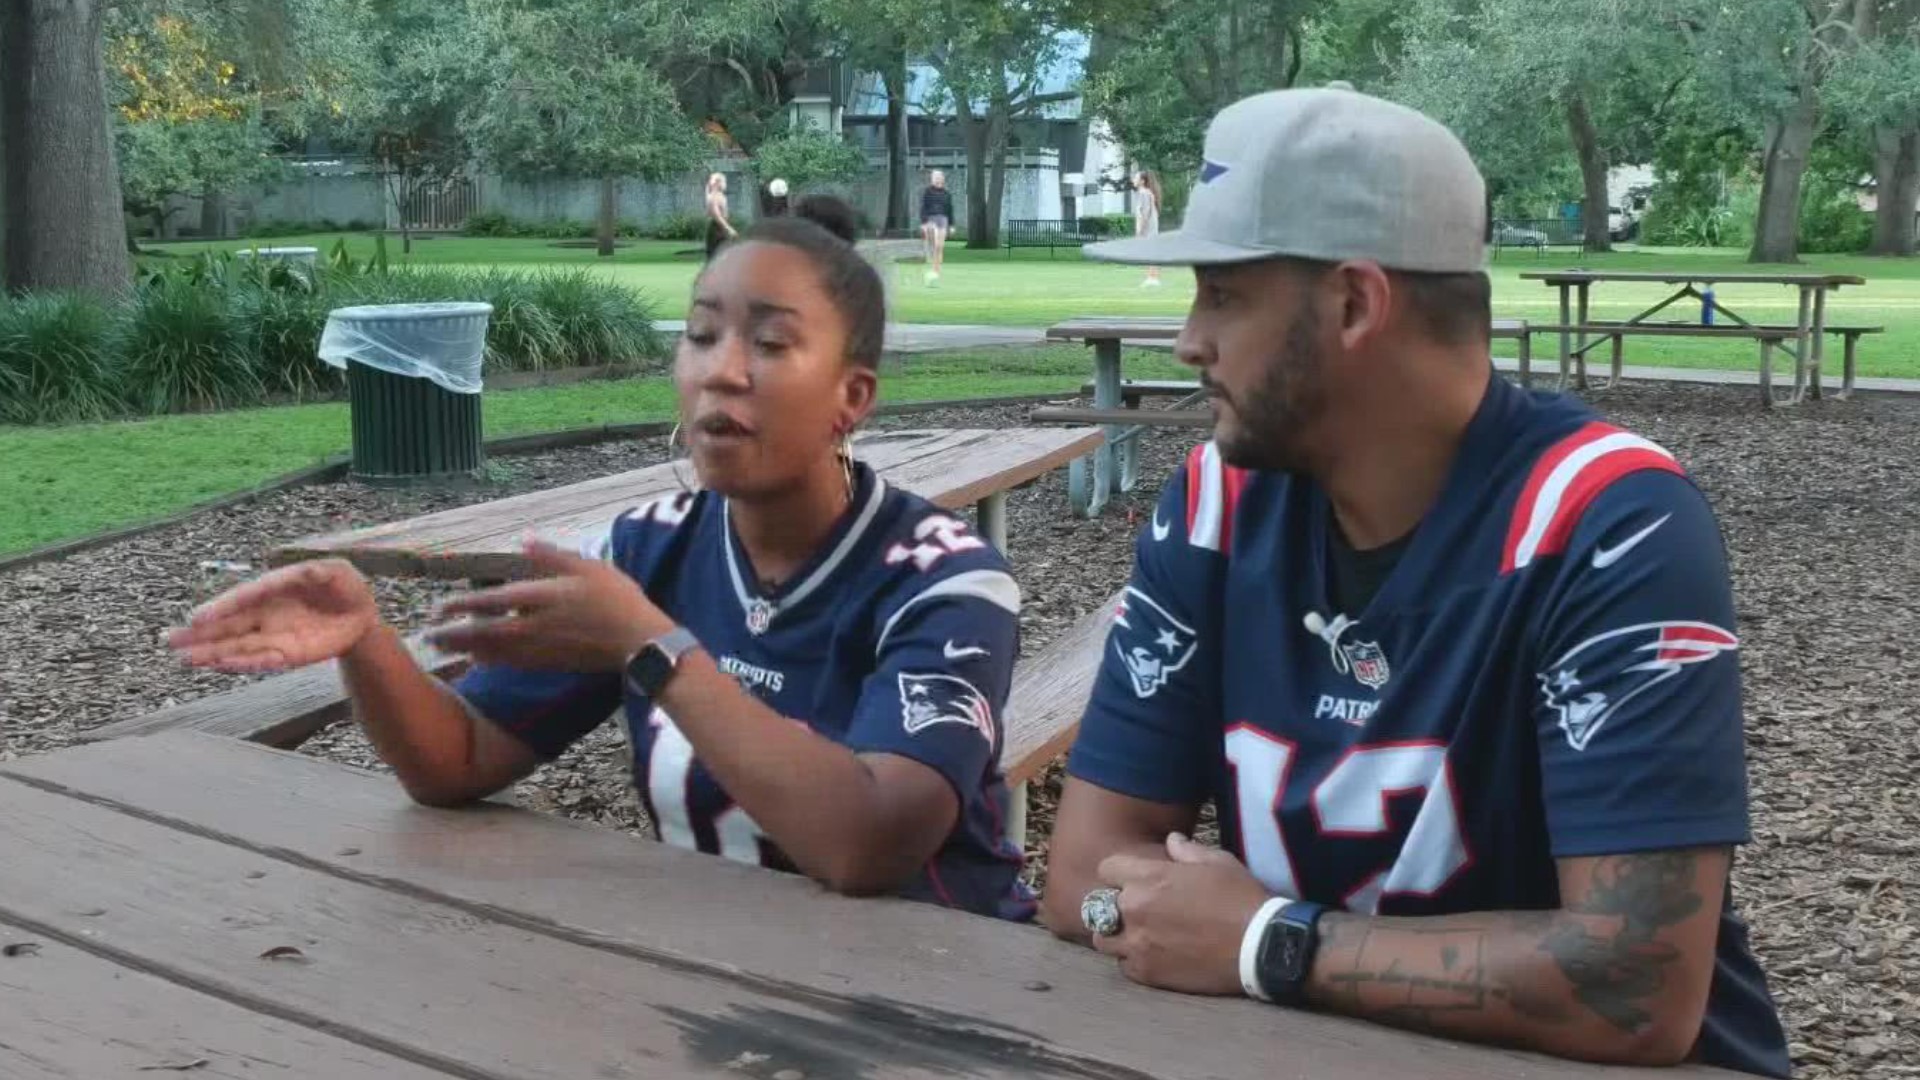 Hear from the Patriots Nation of Tampa on what Tom Brady meant to them and how they will be experiencing Sunday's Patriots vs. Buccaneers game.